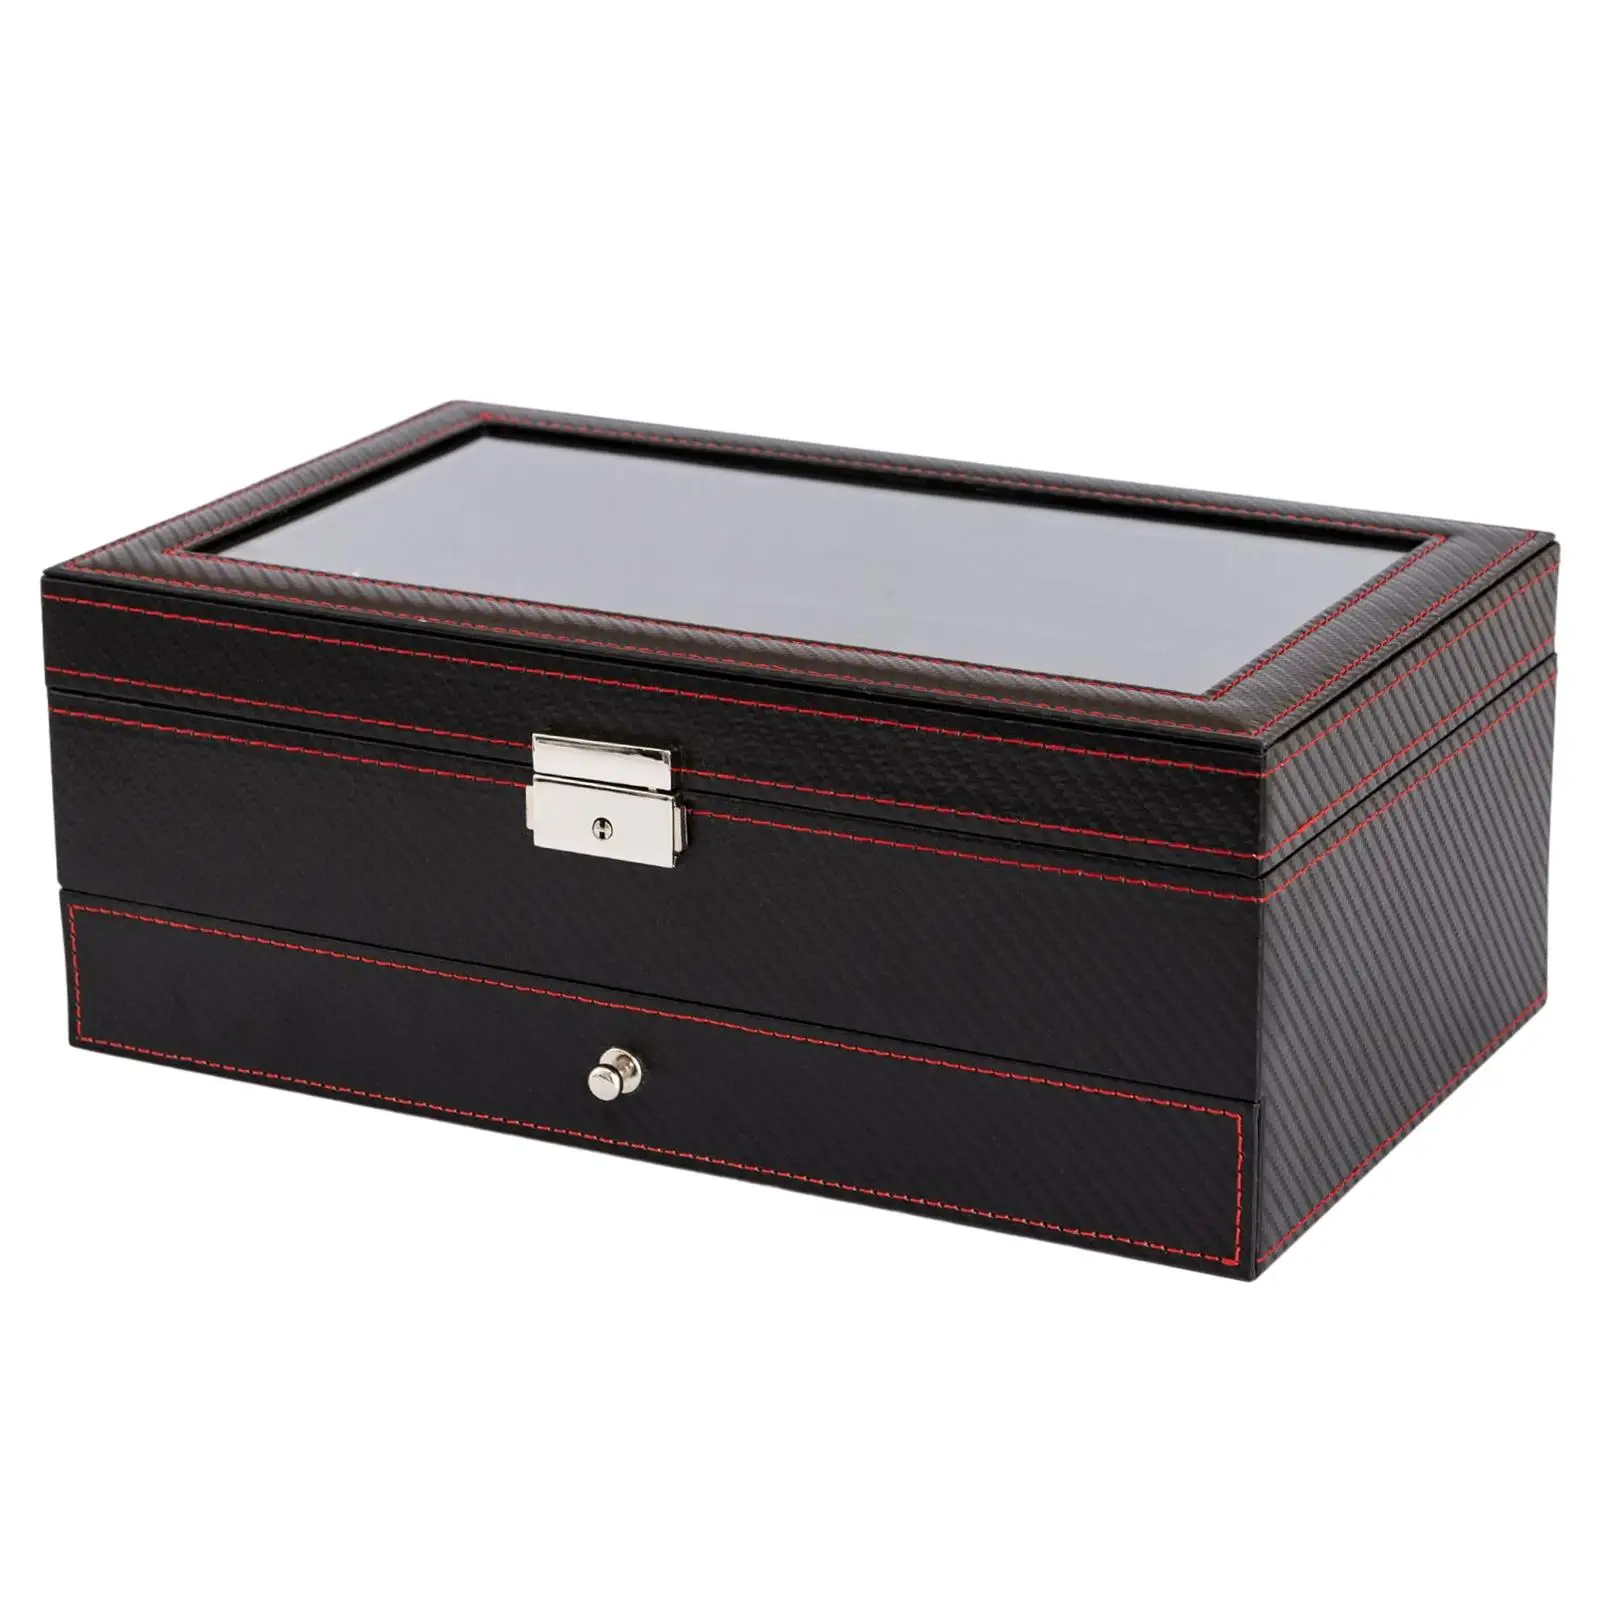 Watch Storage Box Lockable Multifunctional for Shop Display Home Decoration